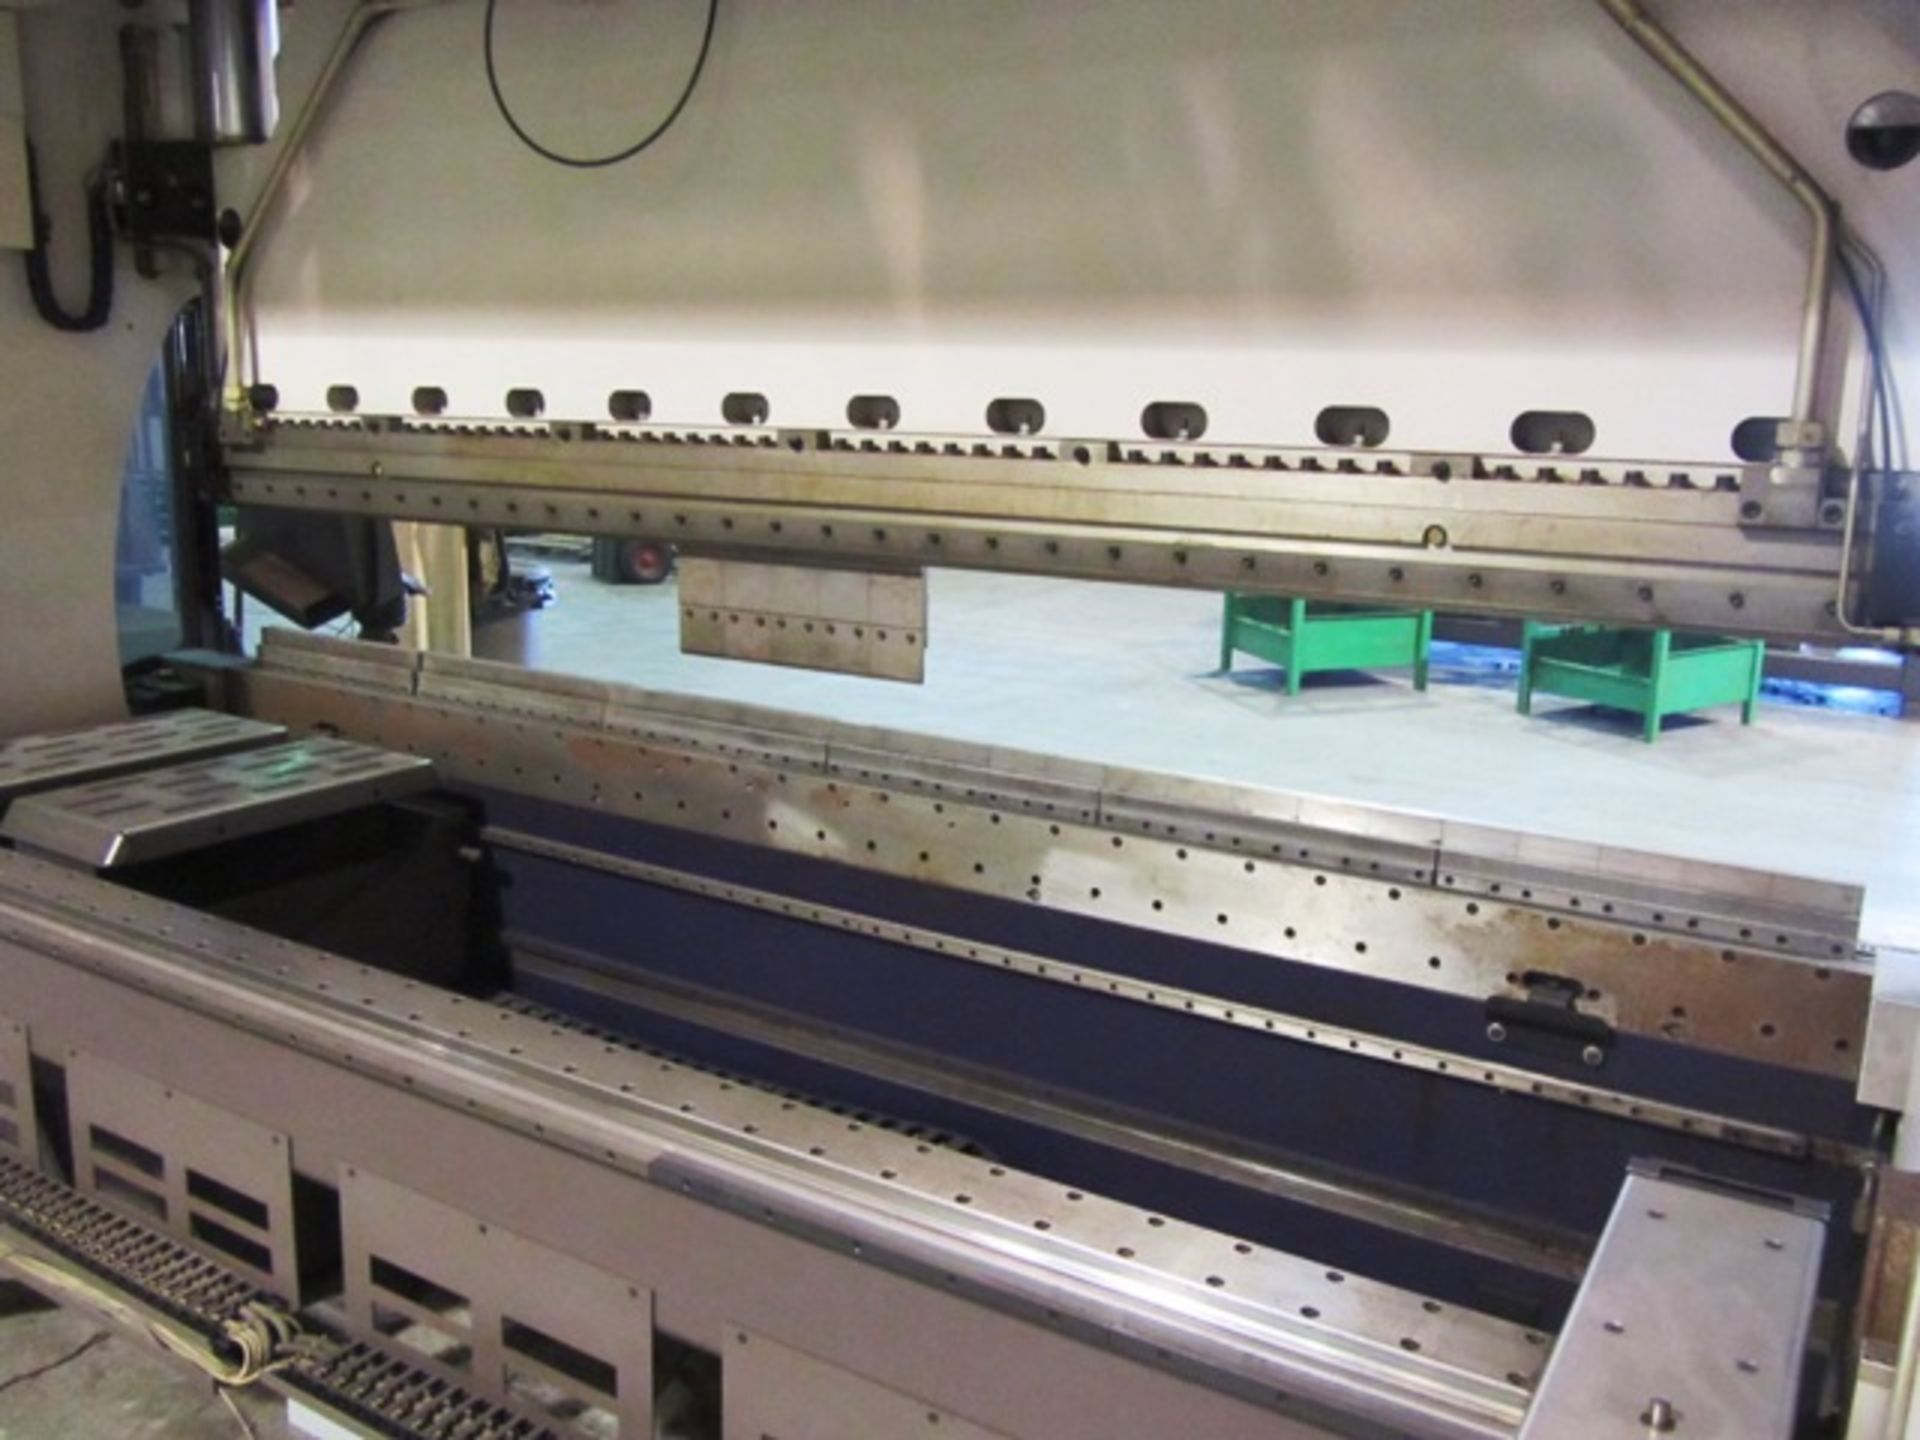 Bystronic (Hammerle) Model P130-310 130 Ton x 10' 6-Axis CNC Hydraulic Press Brake with 122'' - Image 3 of 5